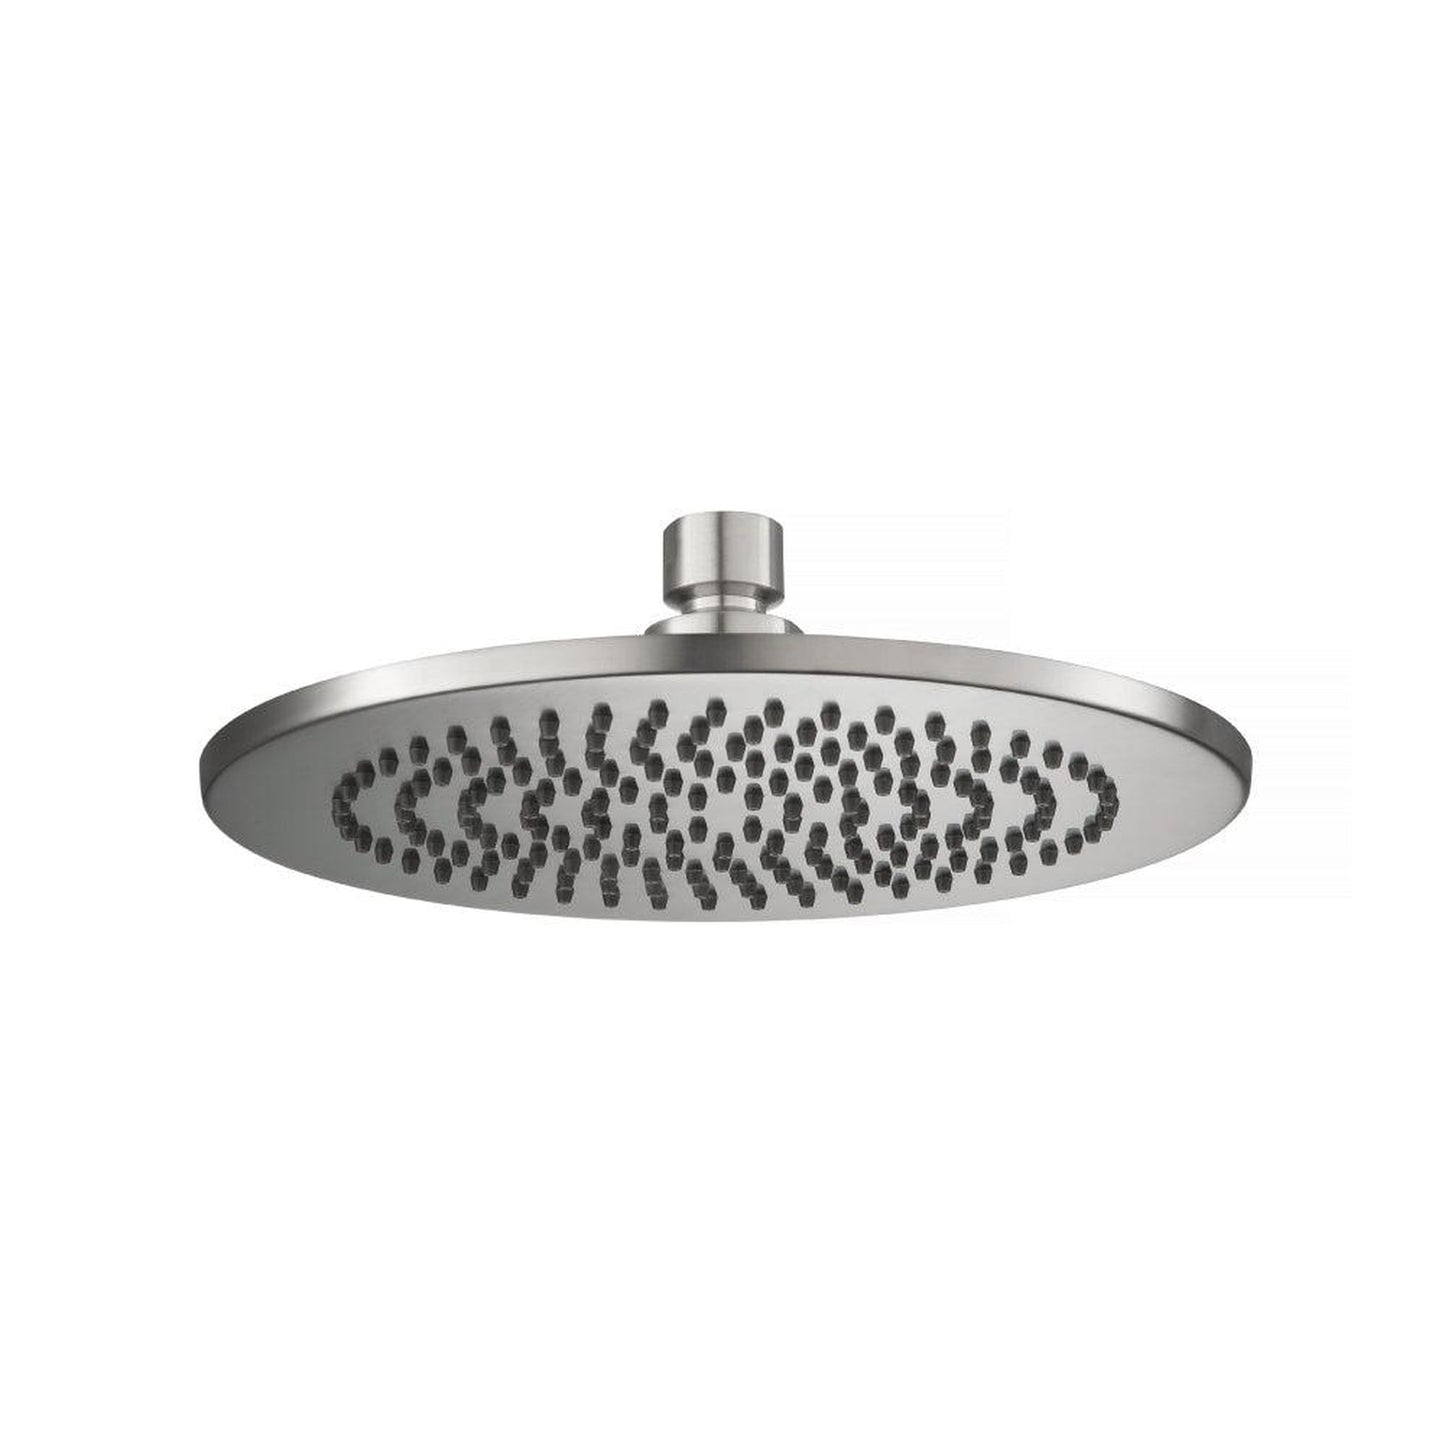 Isenberg Serie 100 Single Output Brushed Nickel PVD Wall-Mounted Shower Set With Single Function Round Rain Shower Head, Two-Handle Shower Trim and 1-Output Wall-Mounted Thermostatic Shower Valve With Integrated Volume Control